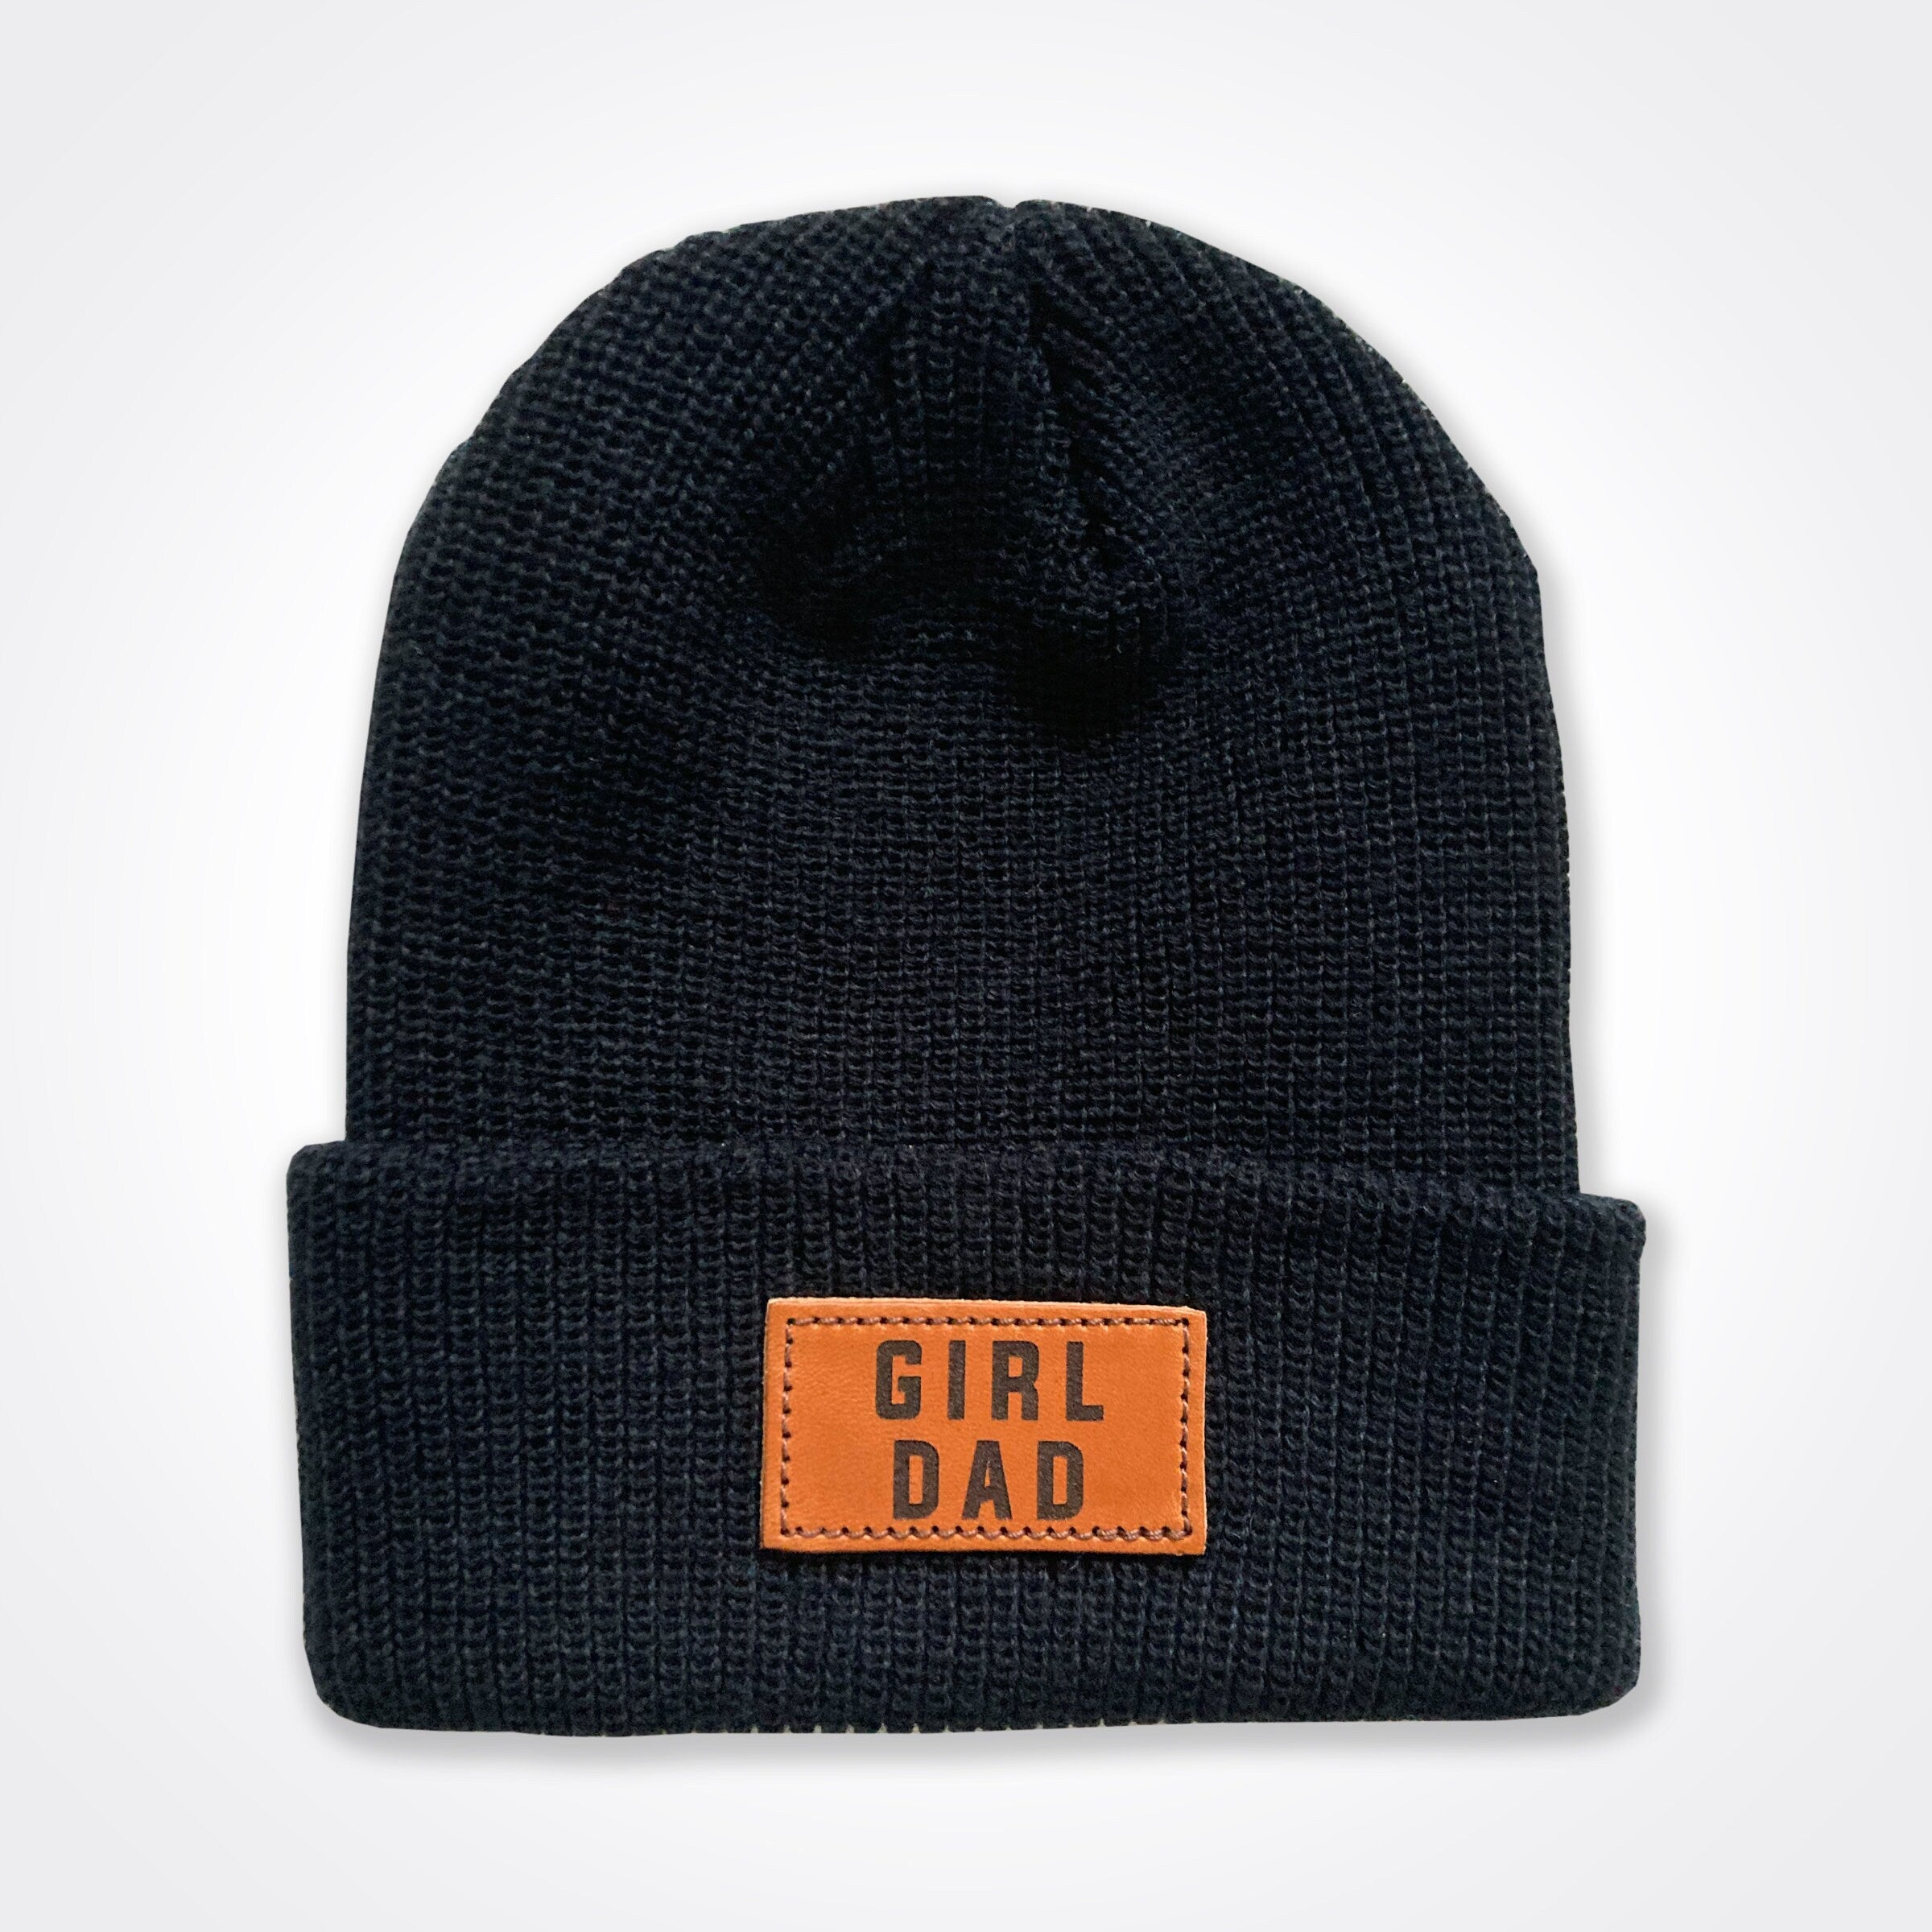 Girldad® Leather Patch Classic Beanie In Black, Light Grey, Grey, Classic Winter Hat, Girl Dad, Girl Dad Gift, Dad of Girls